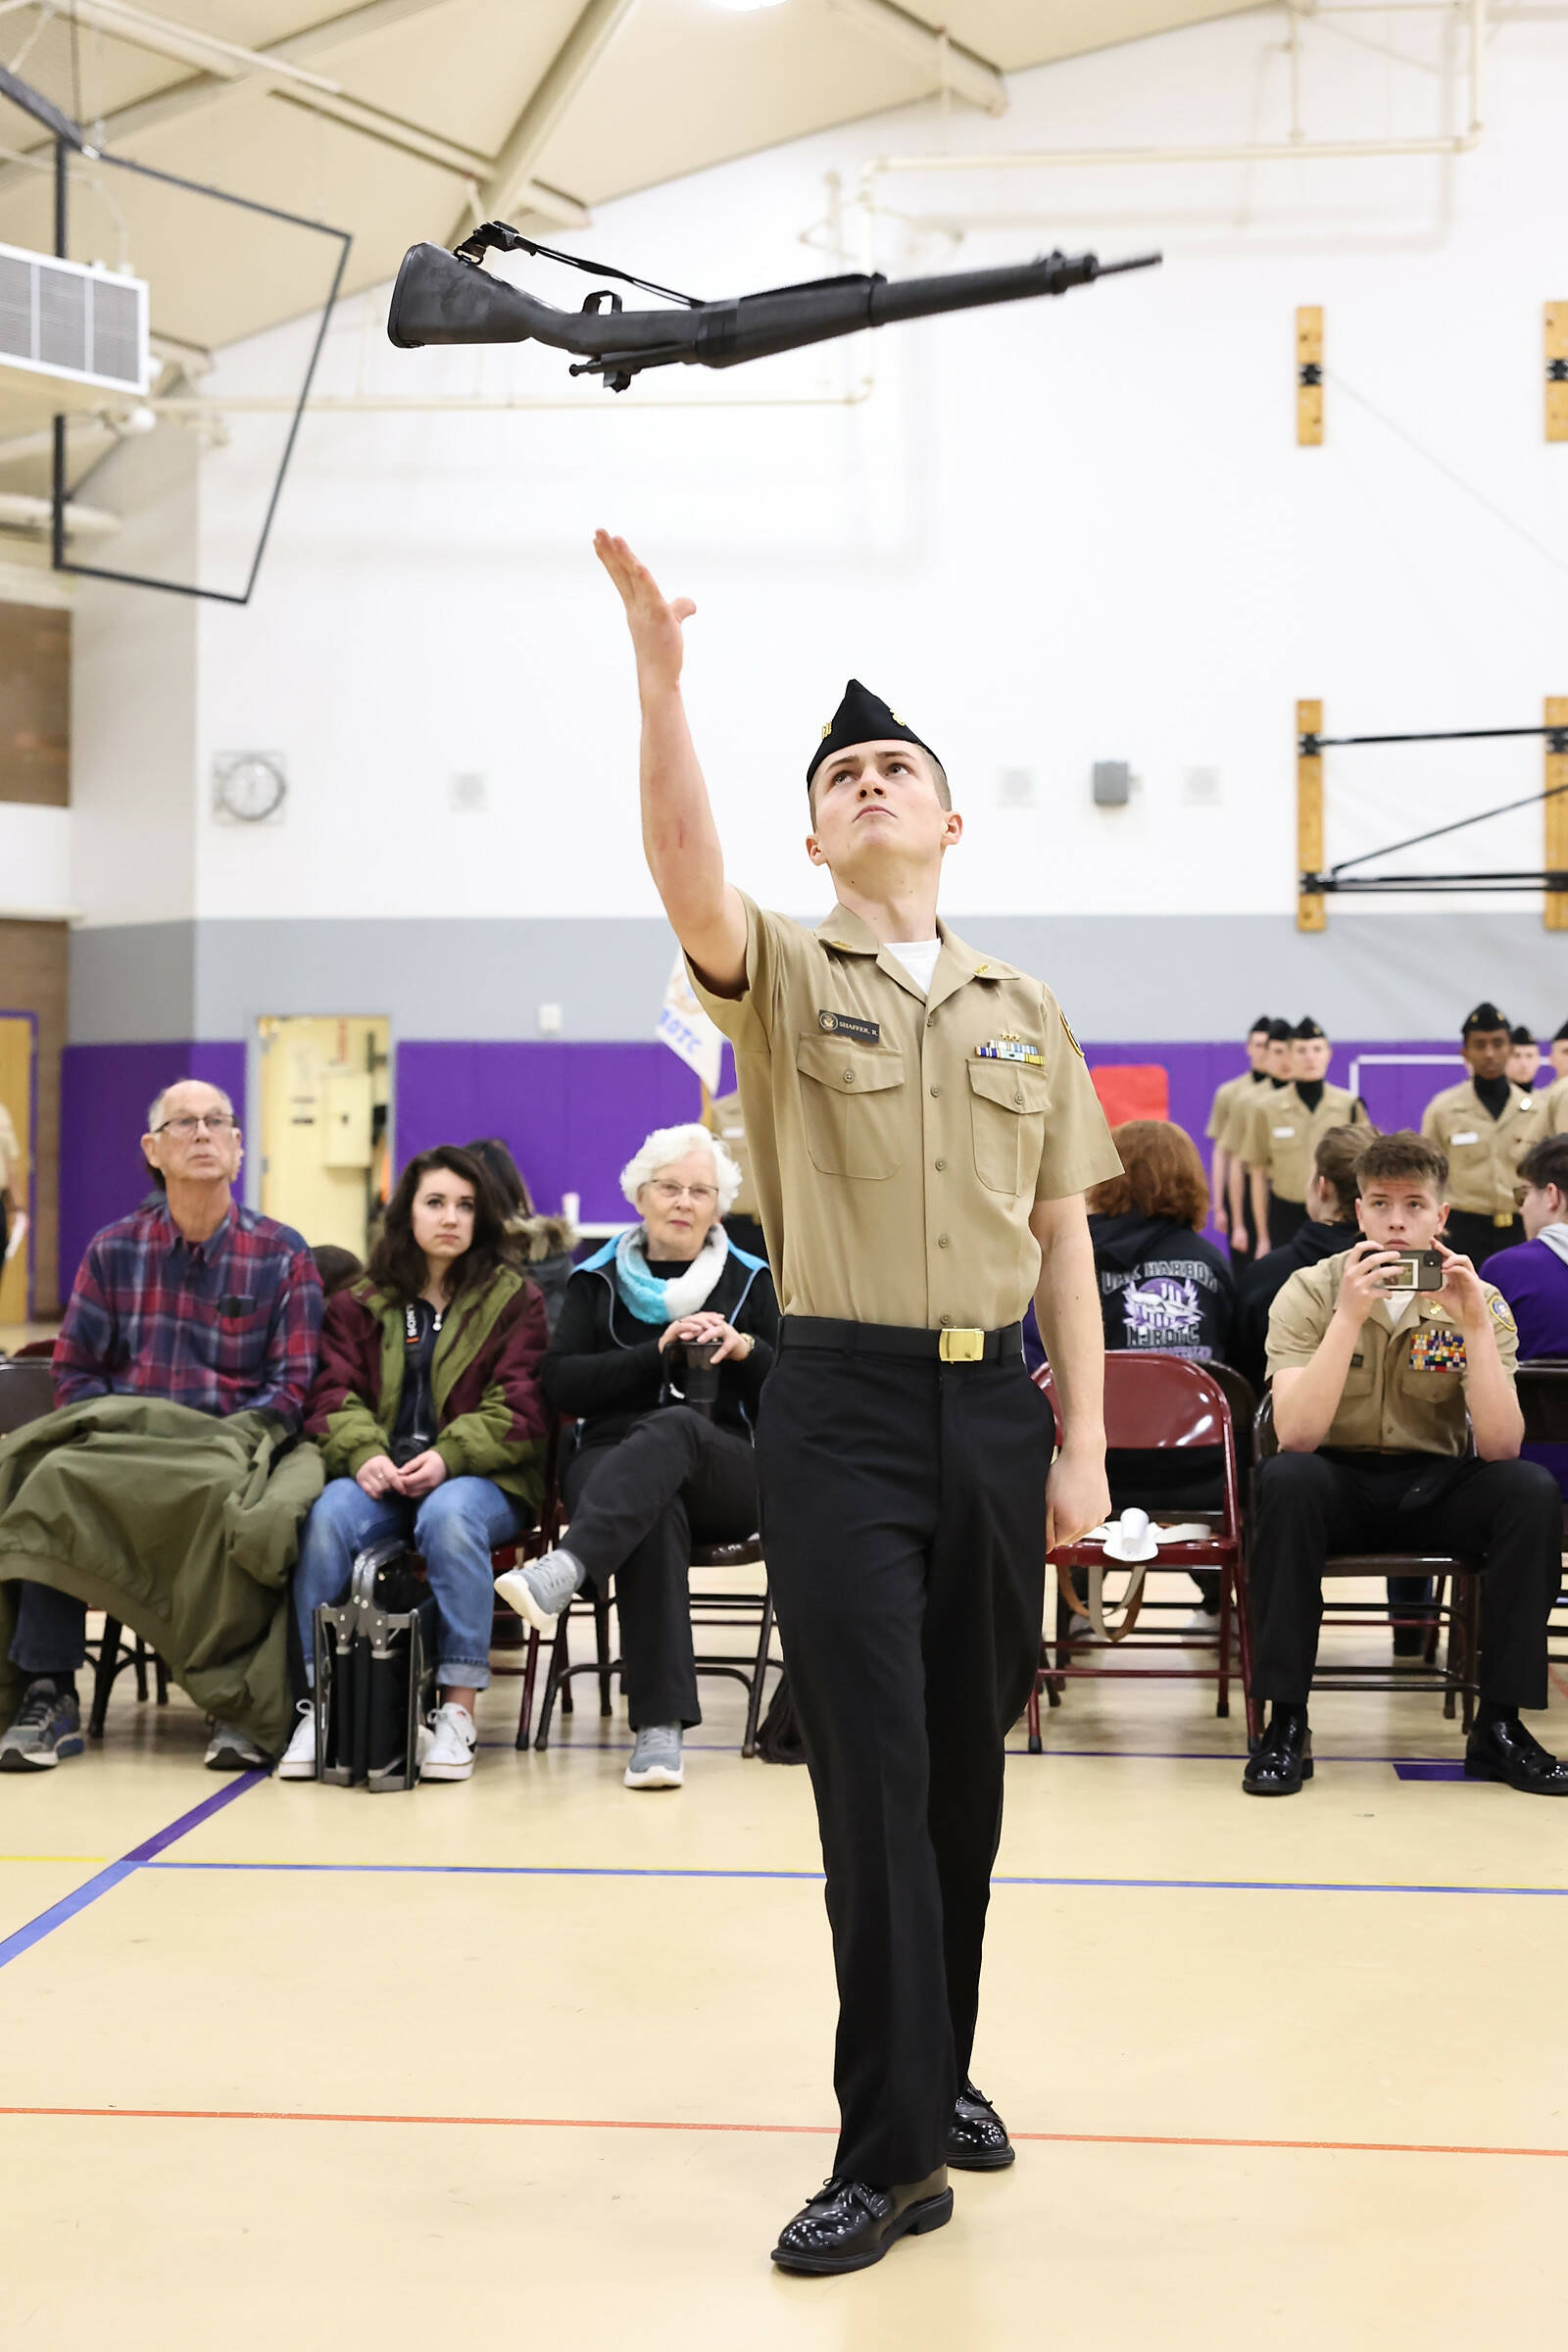 Photos by John Fisken
Oak Harbor student Raymond Shaffer won first place in the Individual Armed Exhibition Drill at the Northwest Drill and Rifle Conference at the Oak Harbor High School Feb 24. Oak Harbor High School’s NJROTC currently ranks the highest in its division, which consists of seven other high schools.